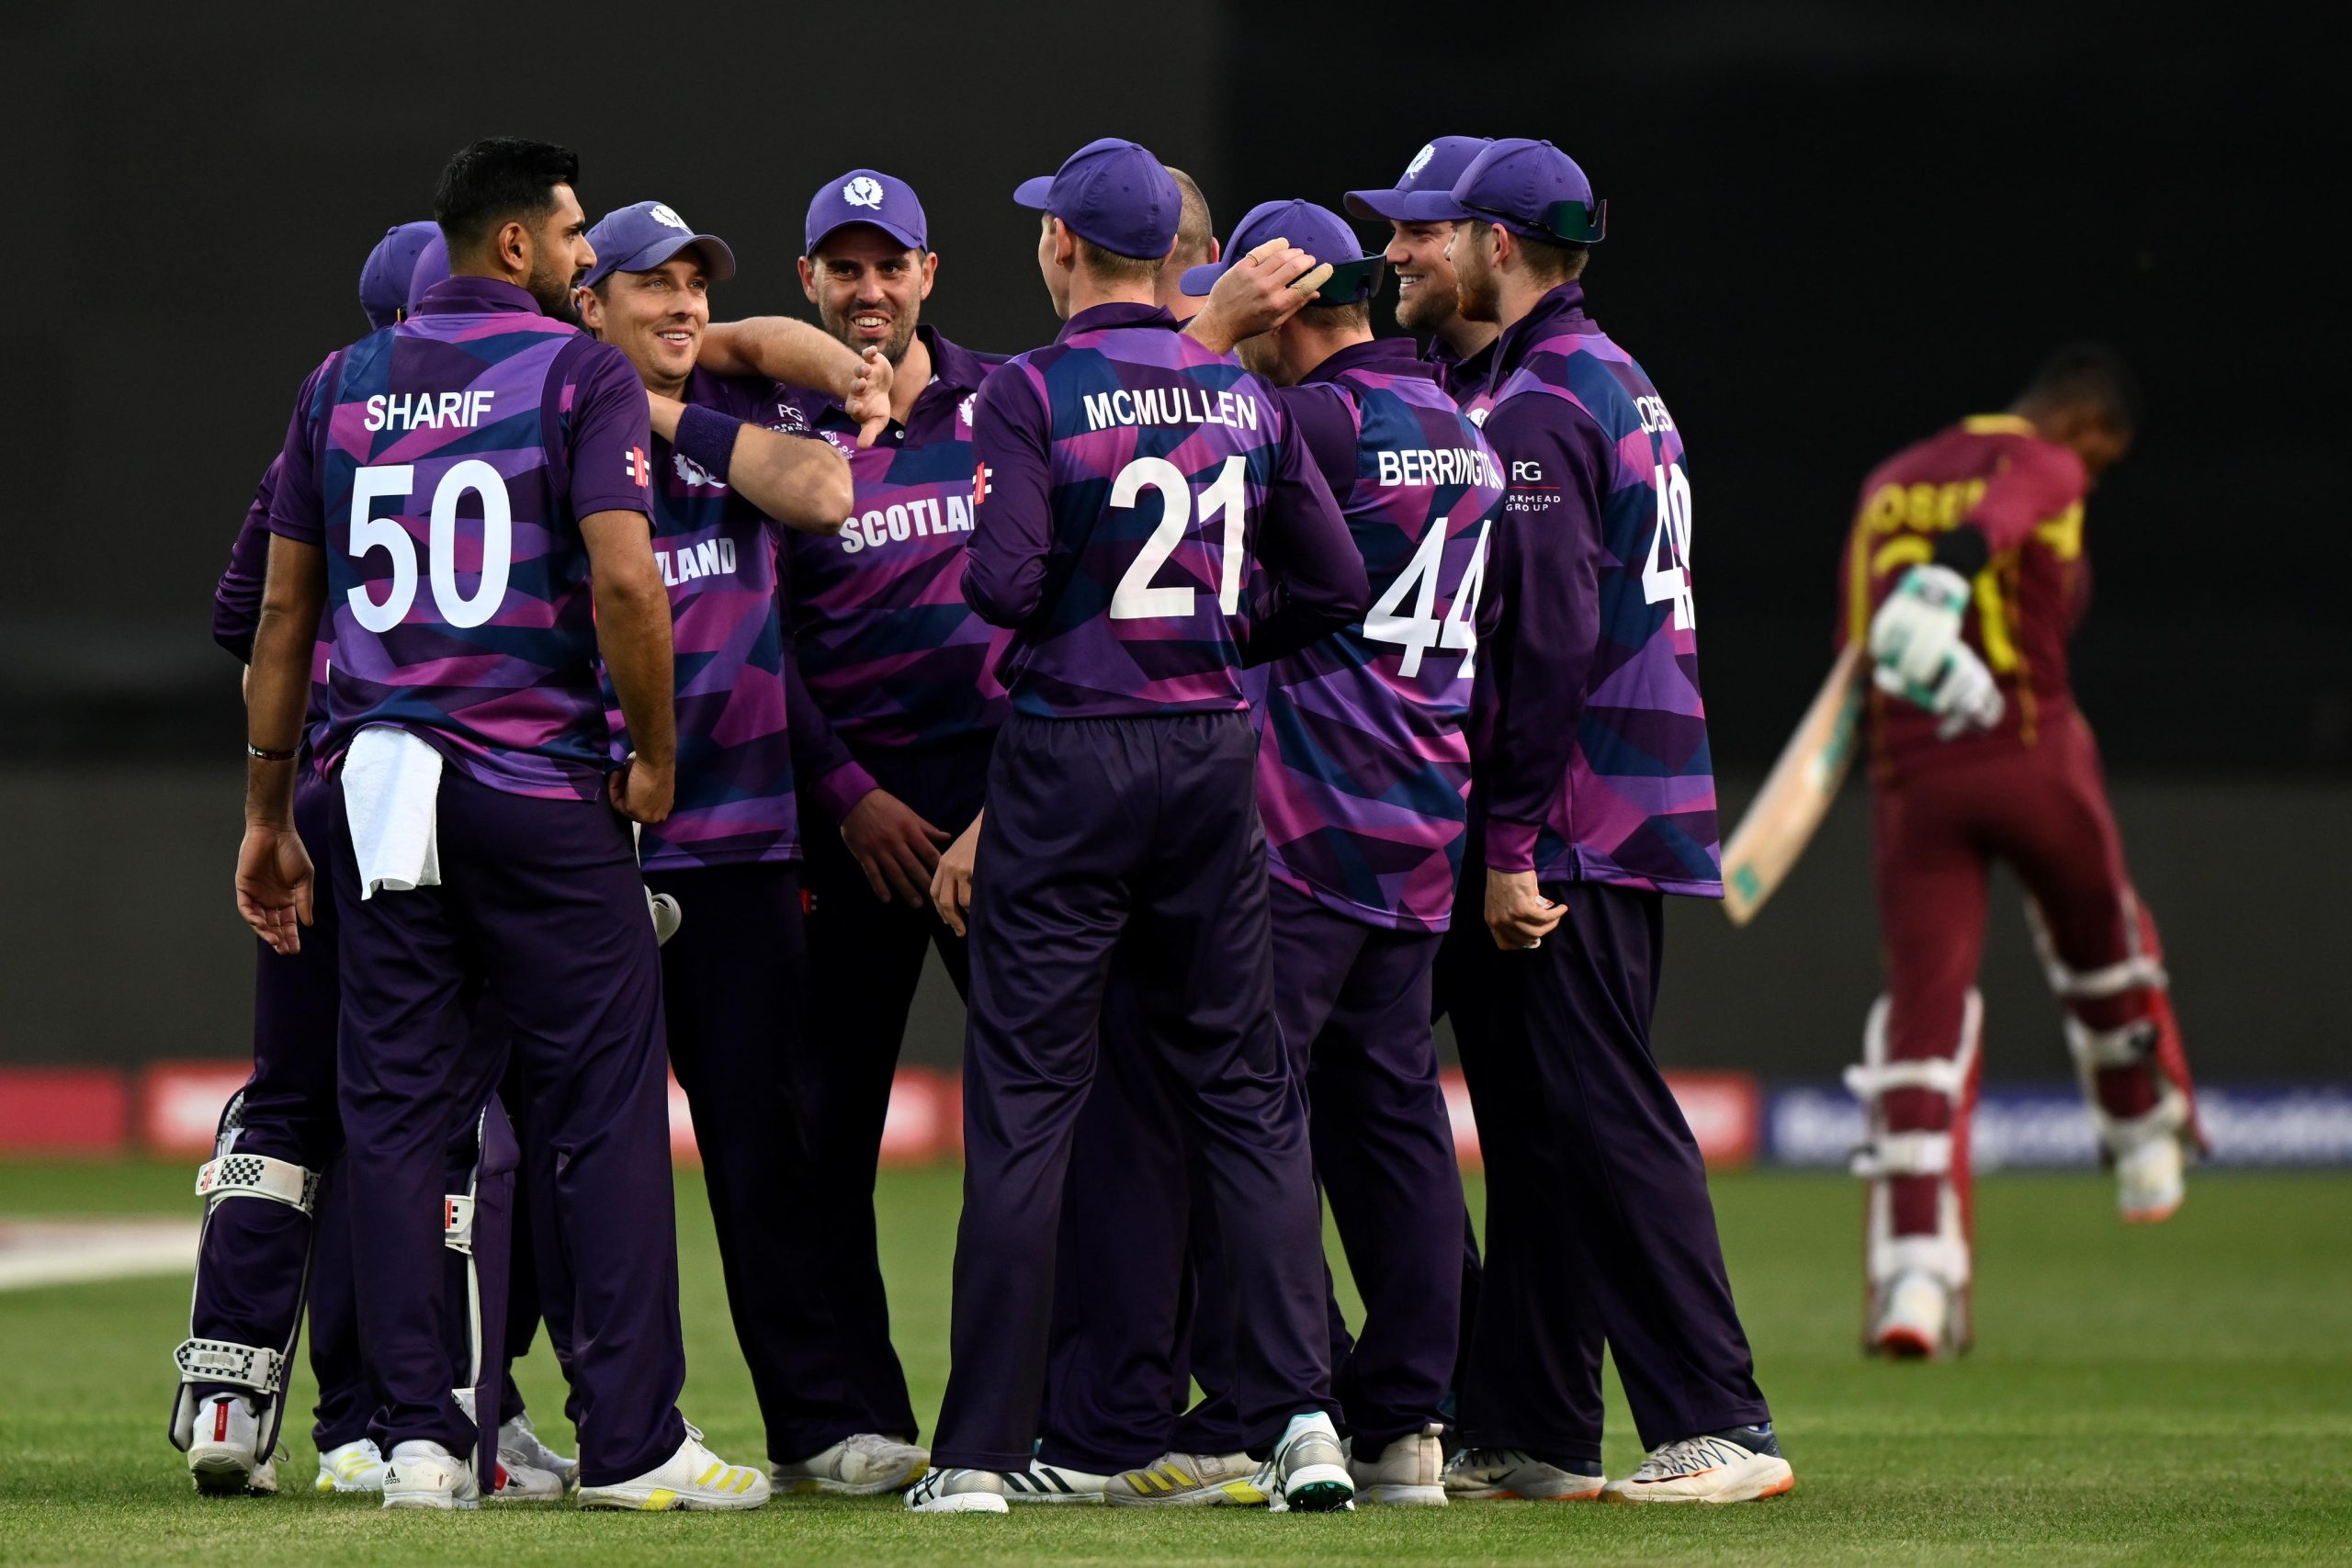 Scotland crushed West Indies in T20 match.